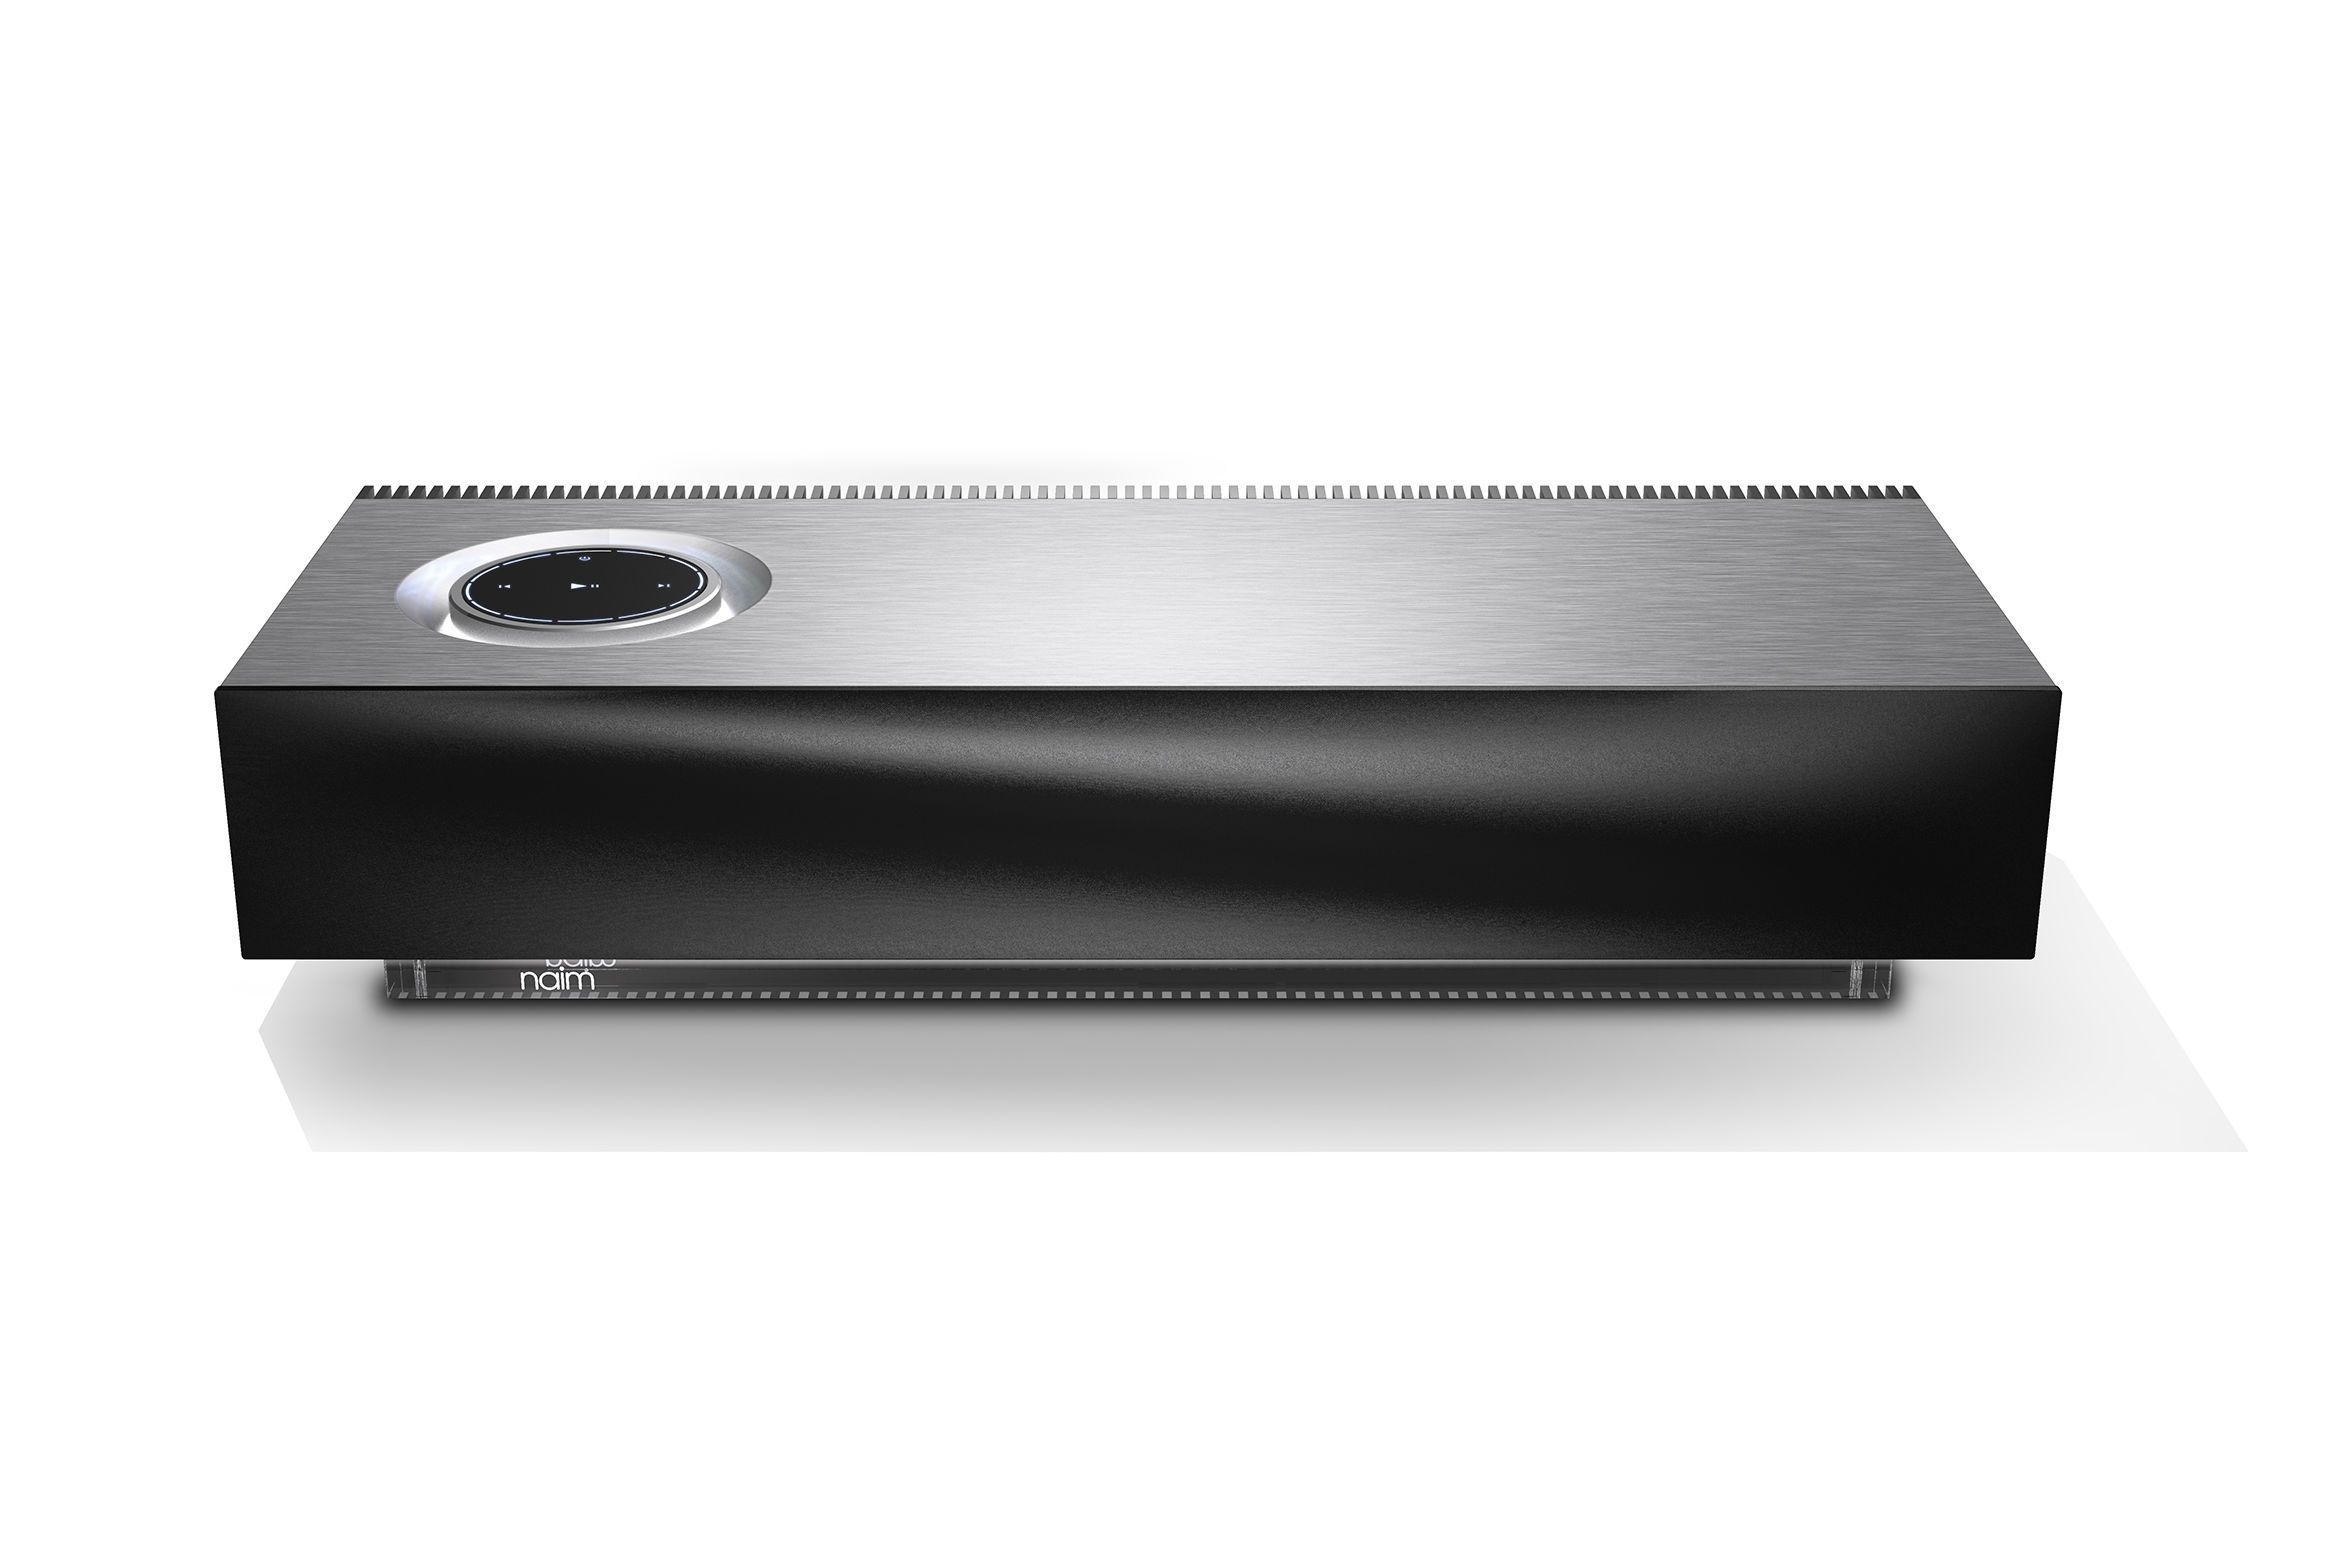 naim s muso aluminium wireless streaming music system to launch in september with app image 1